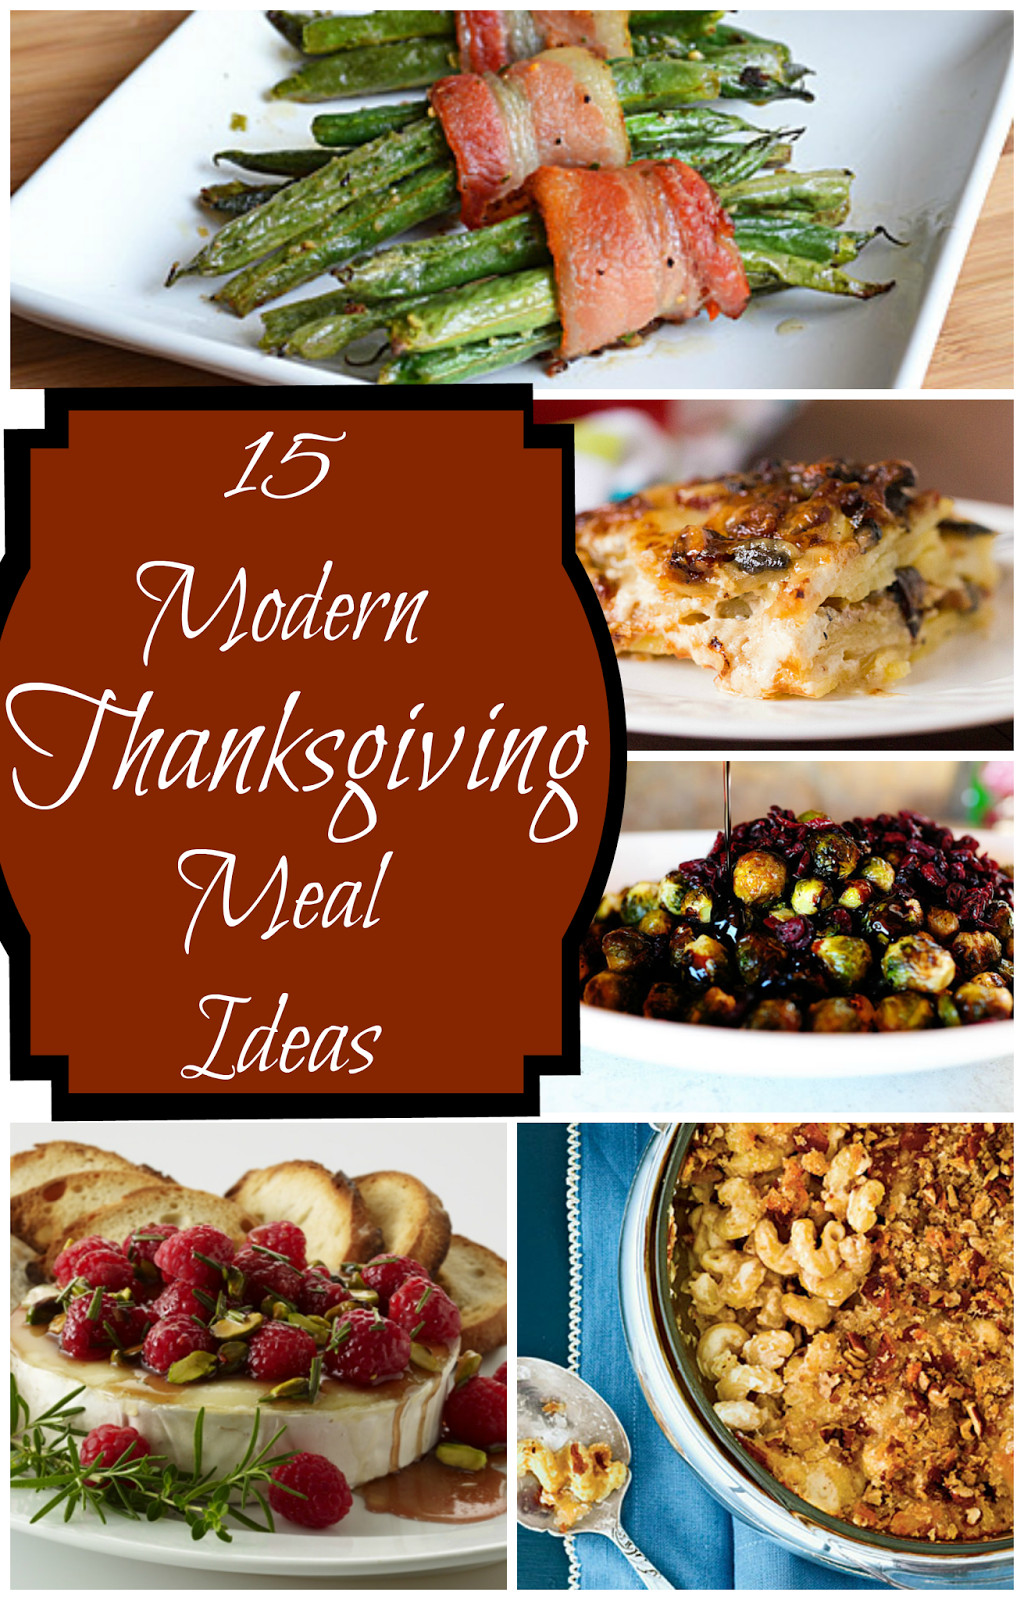 Thanksgiving Dinner Recipes
 Not Your Mother s Recipes 15 Modern Thanksgiving Meal